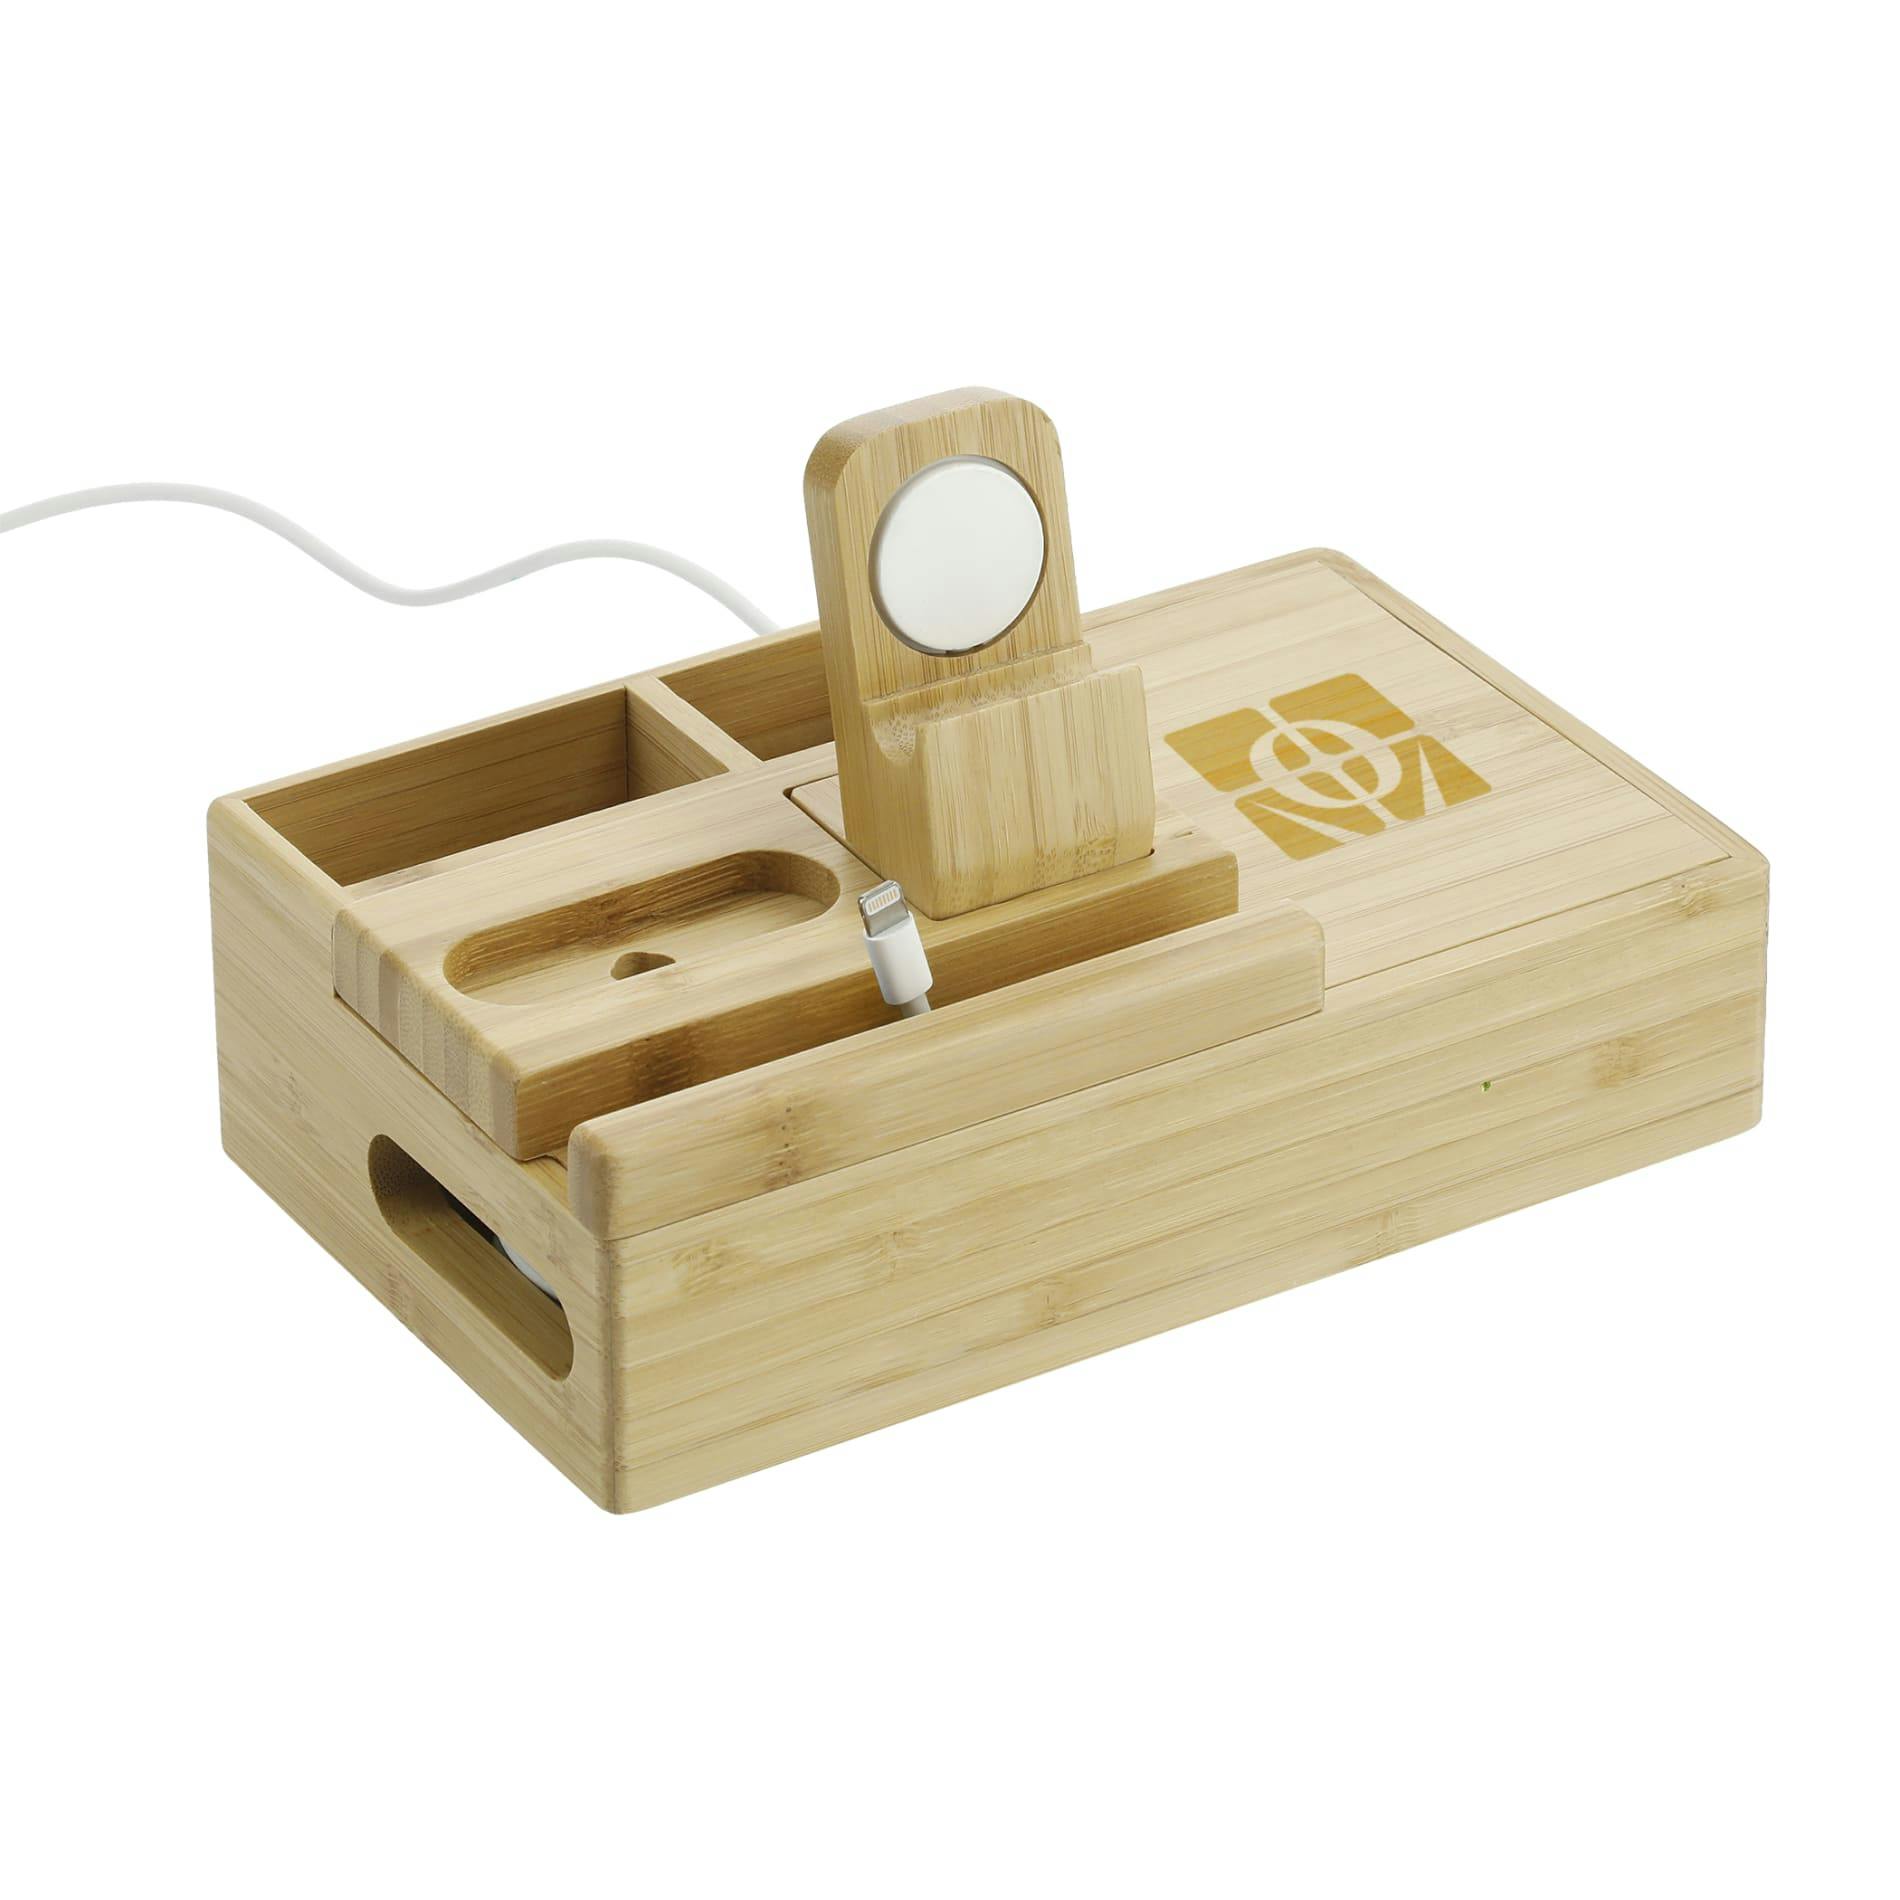 Bamboo Fast Wireless Charging Dock Station - additional Image 5